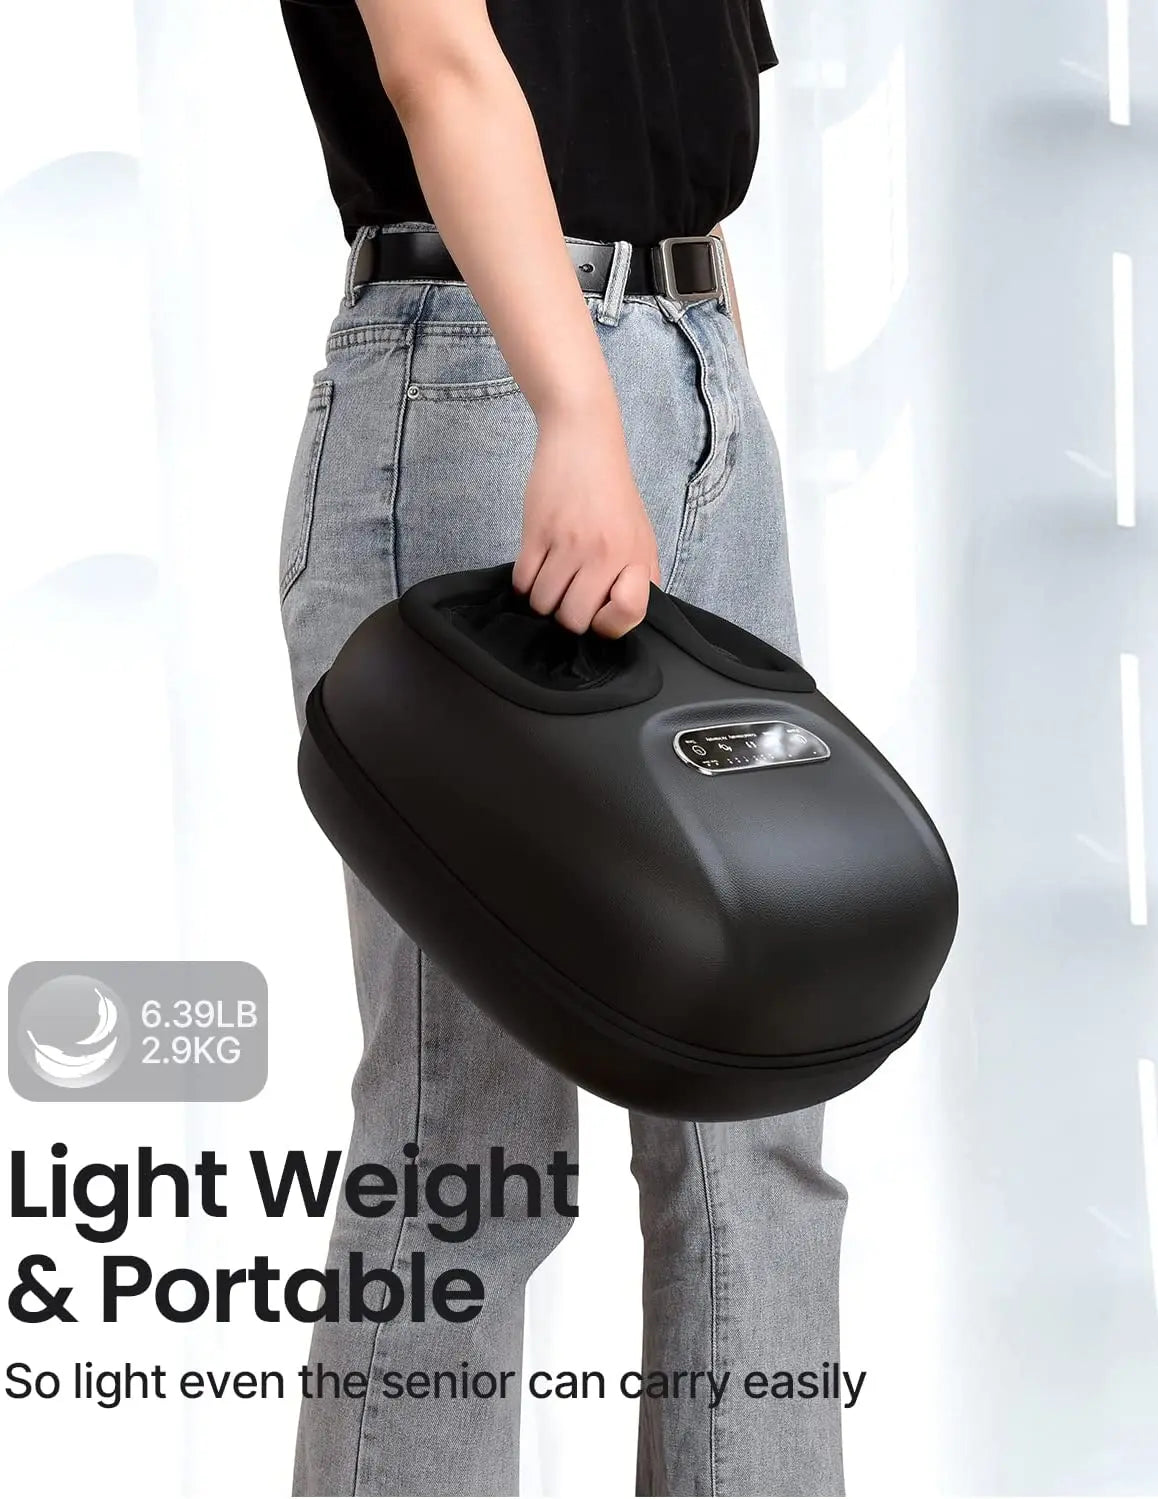 A person holding a Shiatsu Foot Massager Lite by Renpho EU against a white and gray background. Text on the image reads "Light Weight & Portable - 6.39LB 2.9KG - So light even the senior can carry easily." The person is wearing light blue jeans and a black shirt, ready for a customized massage experience.